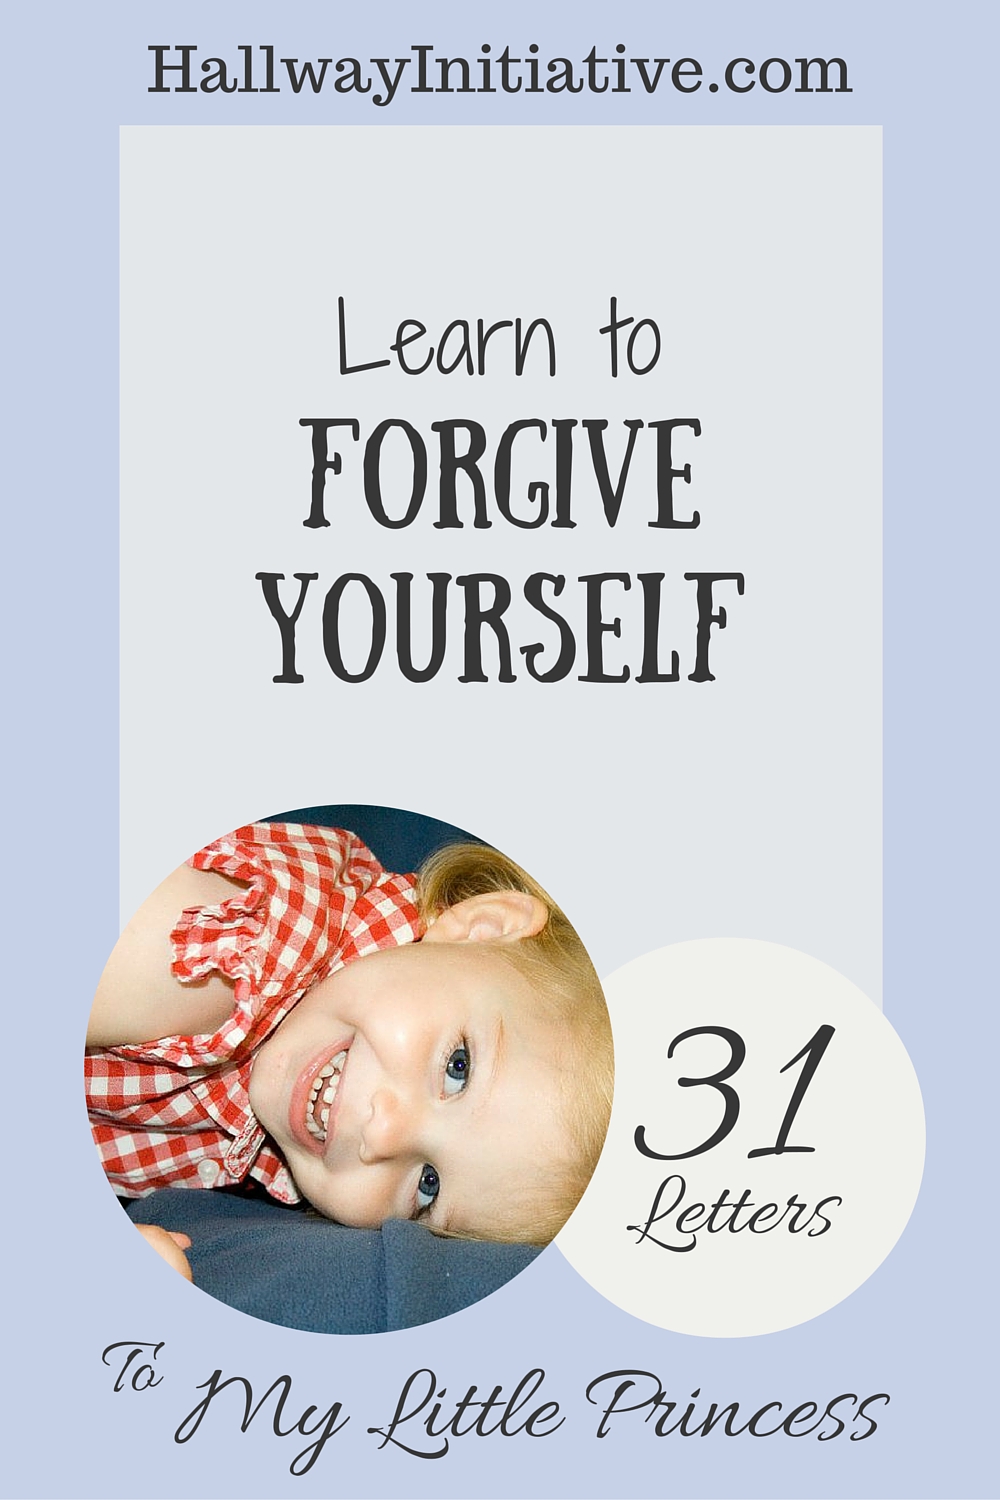 Learn to forgive yourself